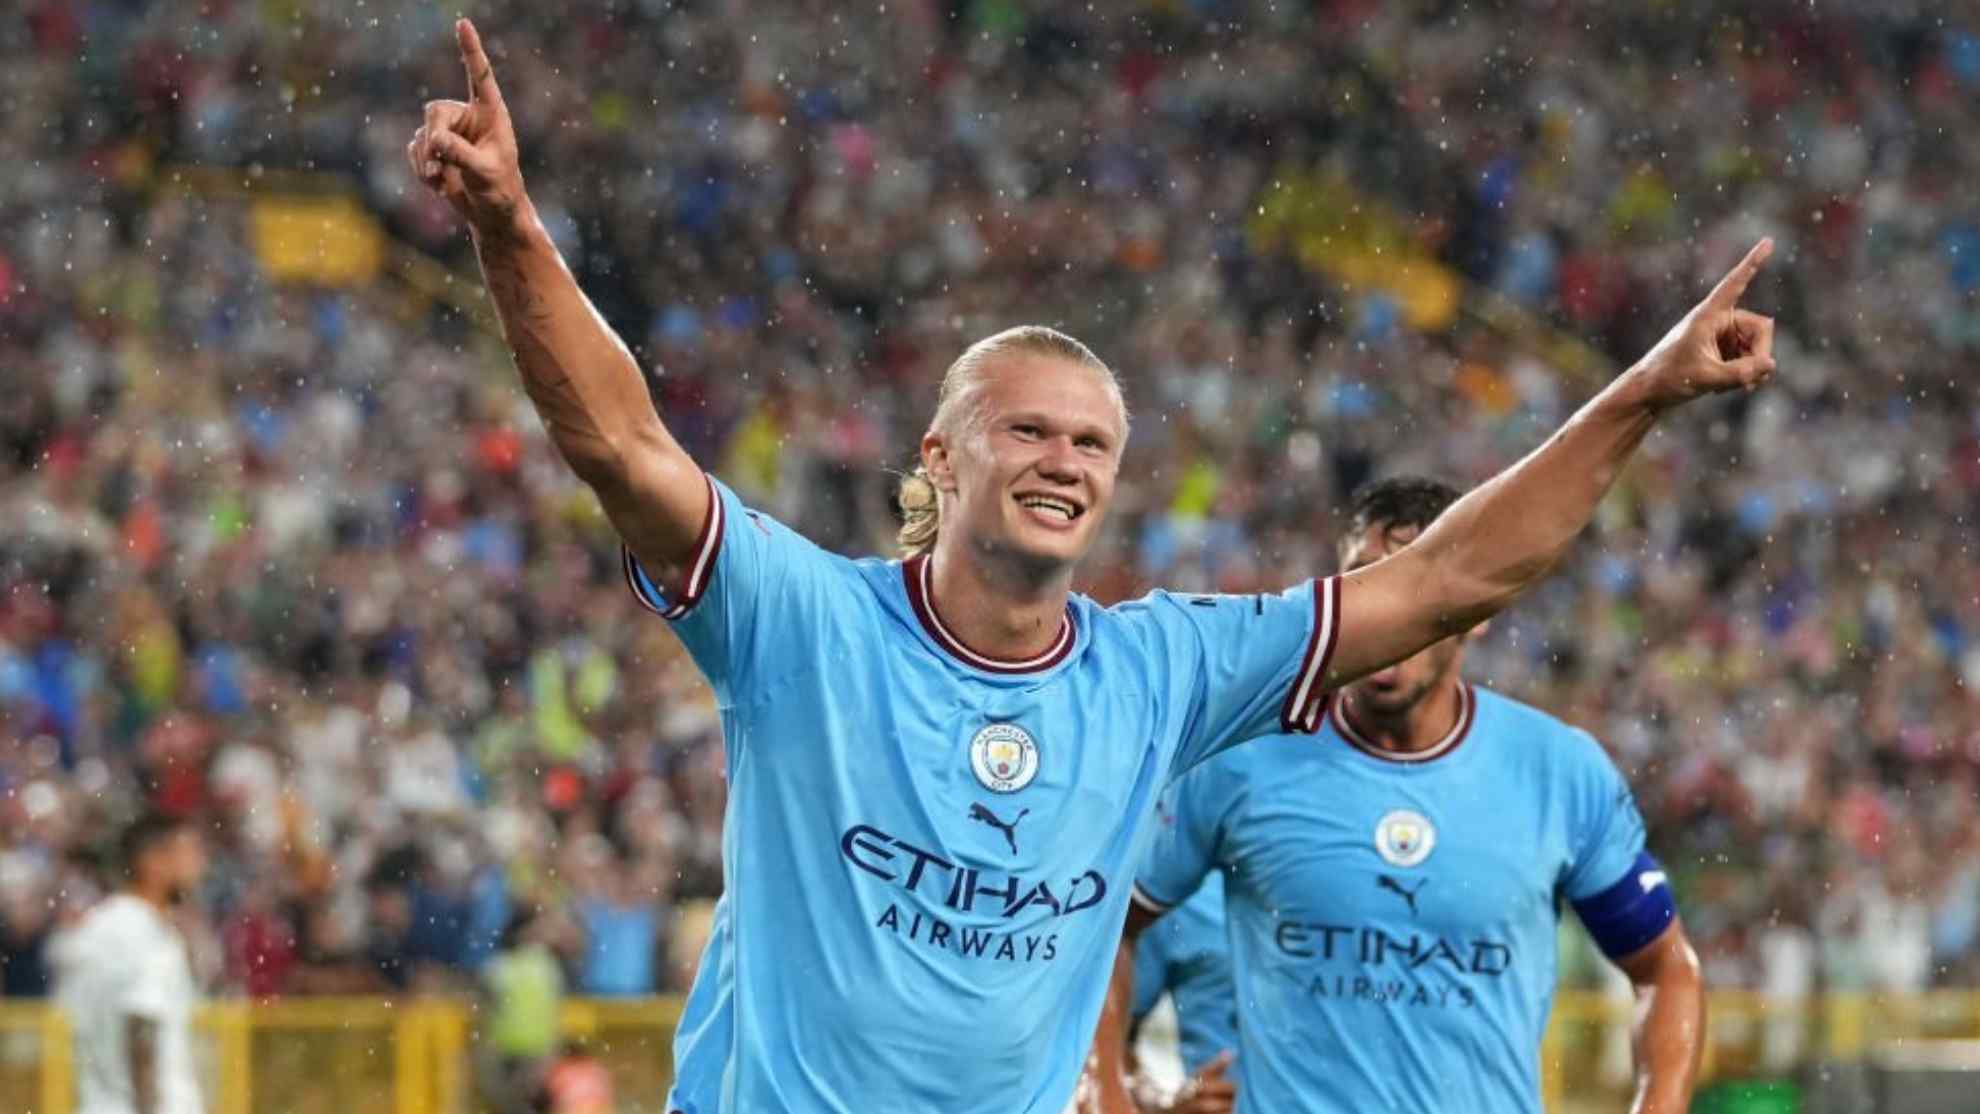 Haaland needed just 12 minutes to score his first Manchester City goal